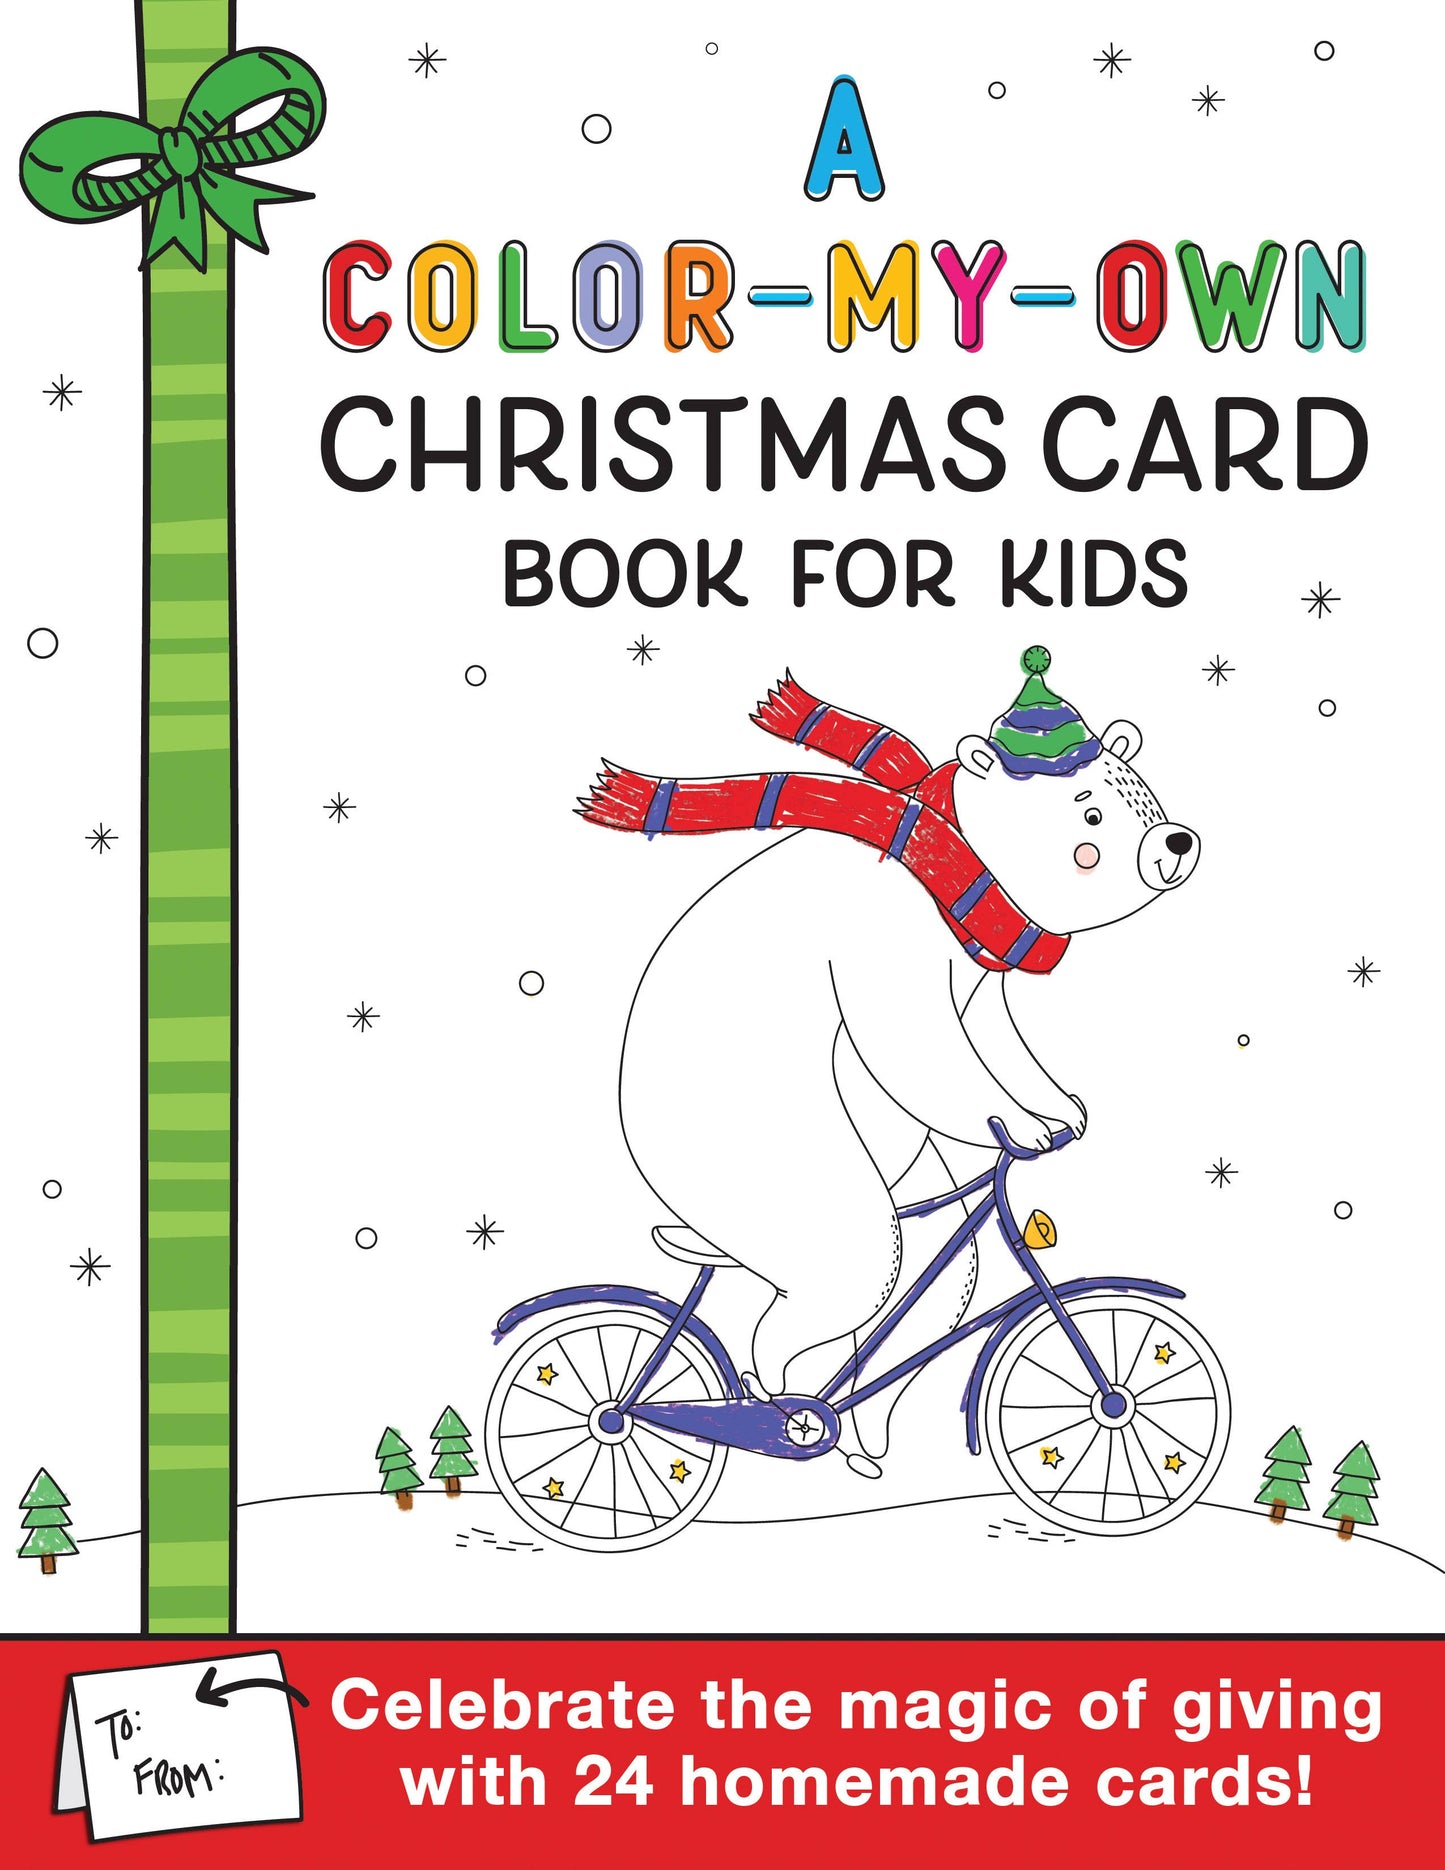 Color-My-Own Christmas Card Book for Kids, A (TP)